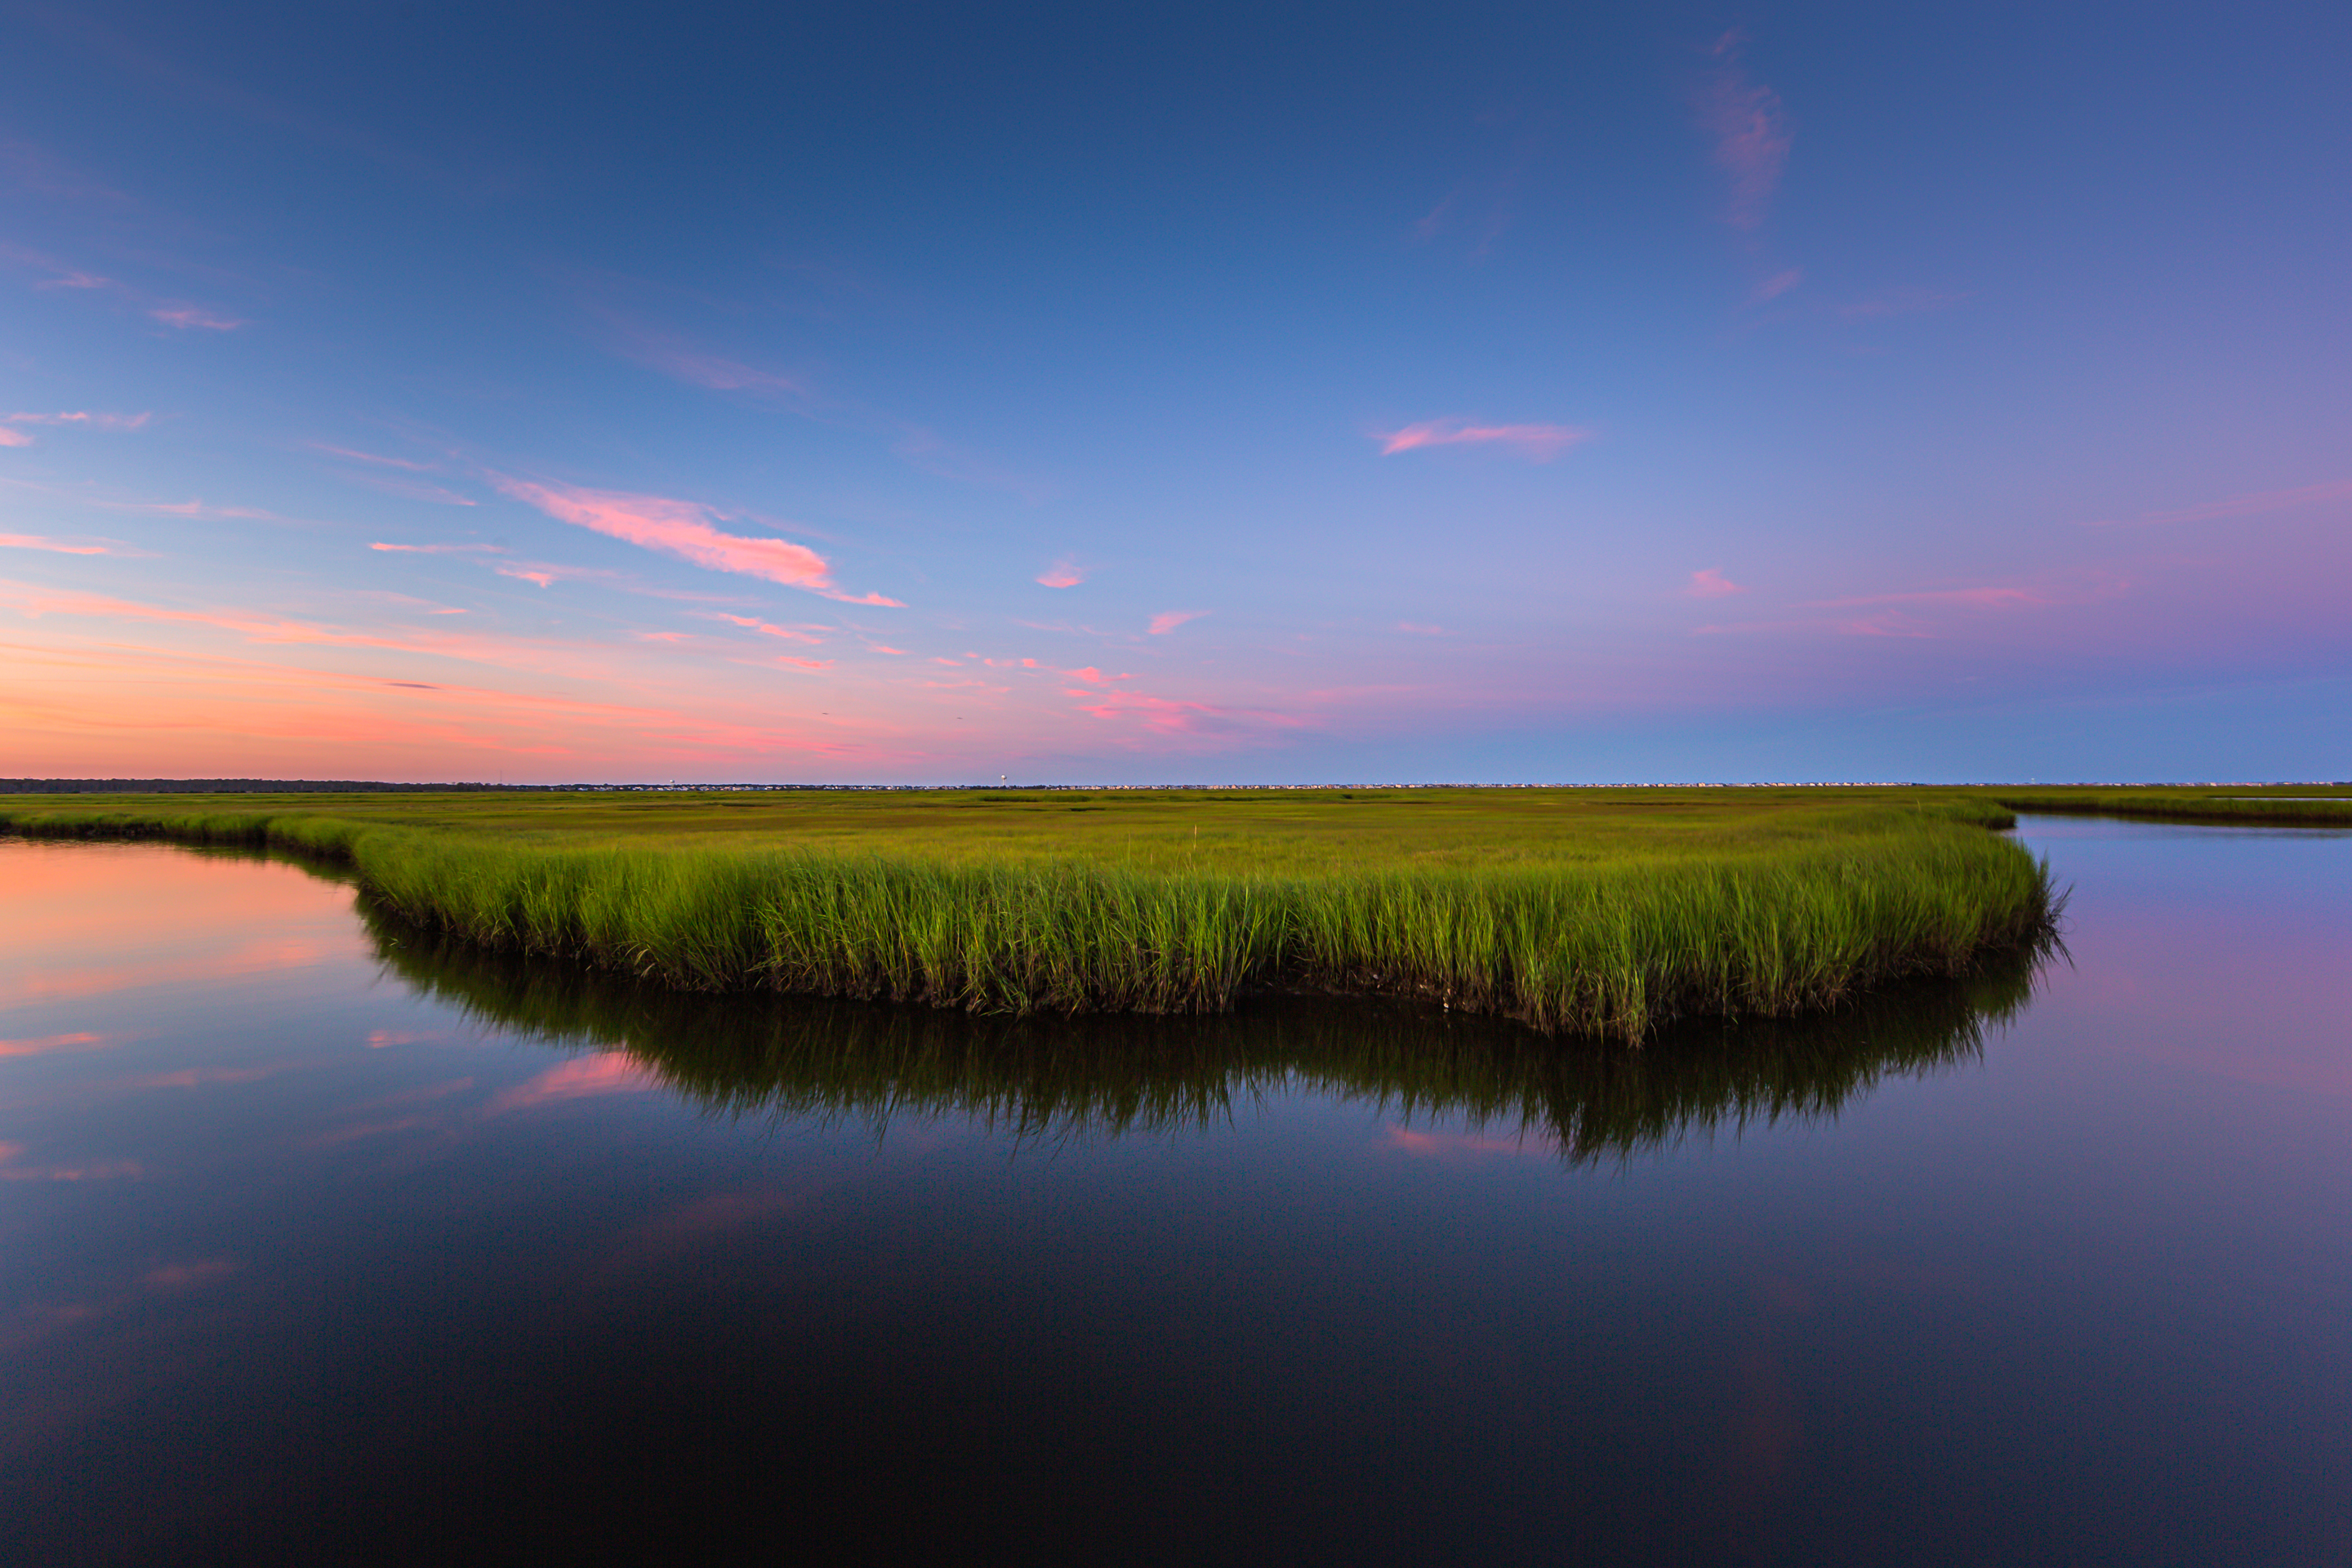 14mm wide angle photograph of a salt marsh oxbow feature at blue hour. Mirrored reflection captures the still colored pastel clouds stretched thin across the sky.